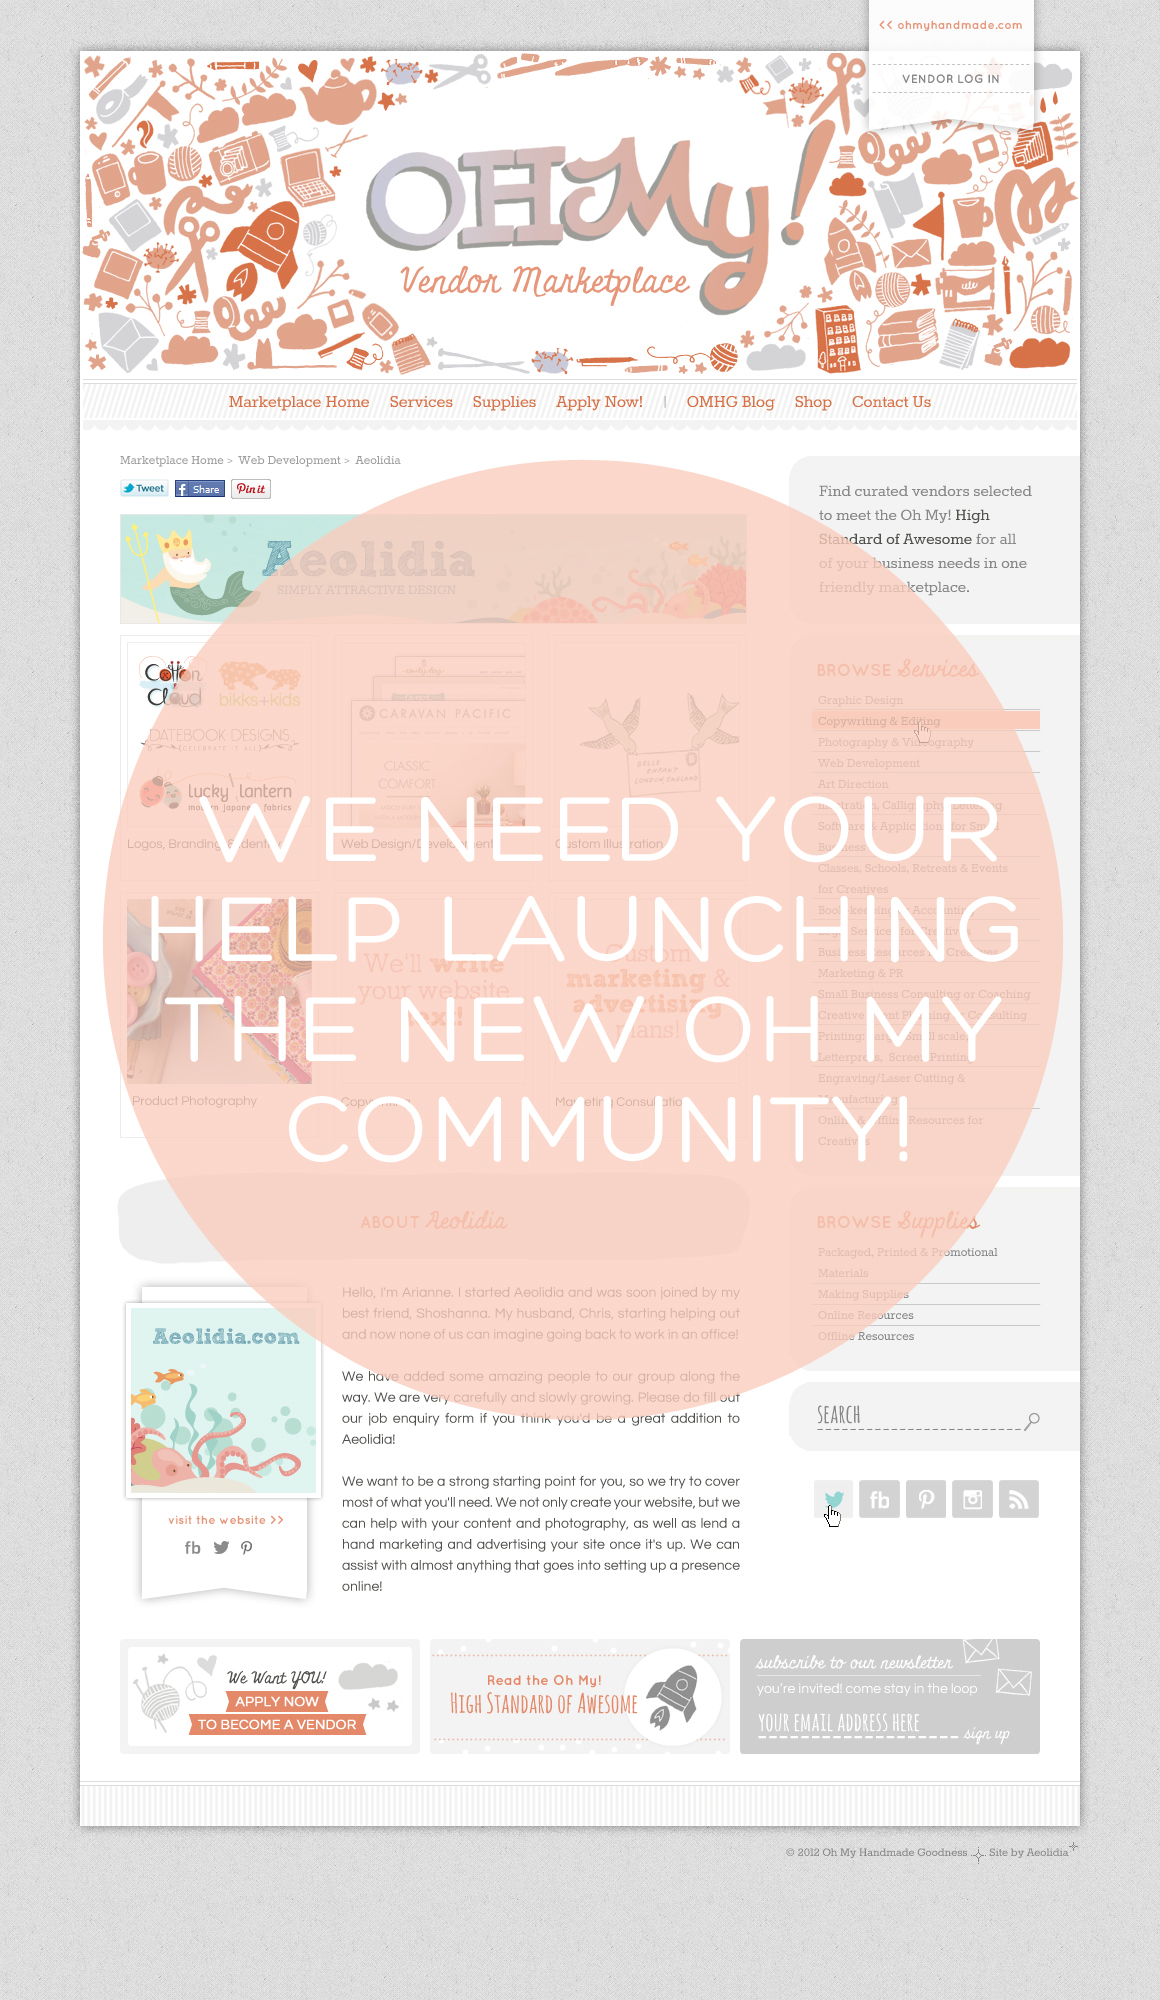 Help Launch the New Oh My! Community